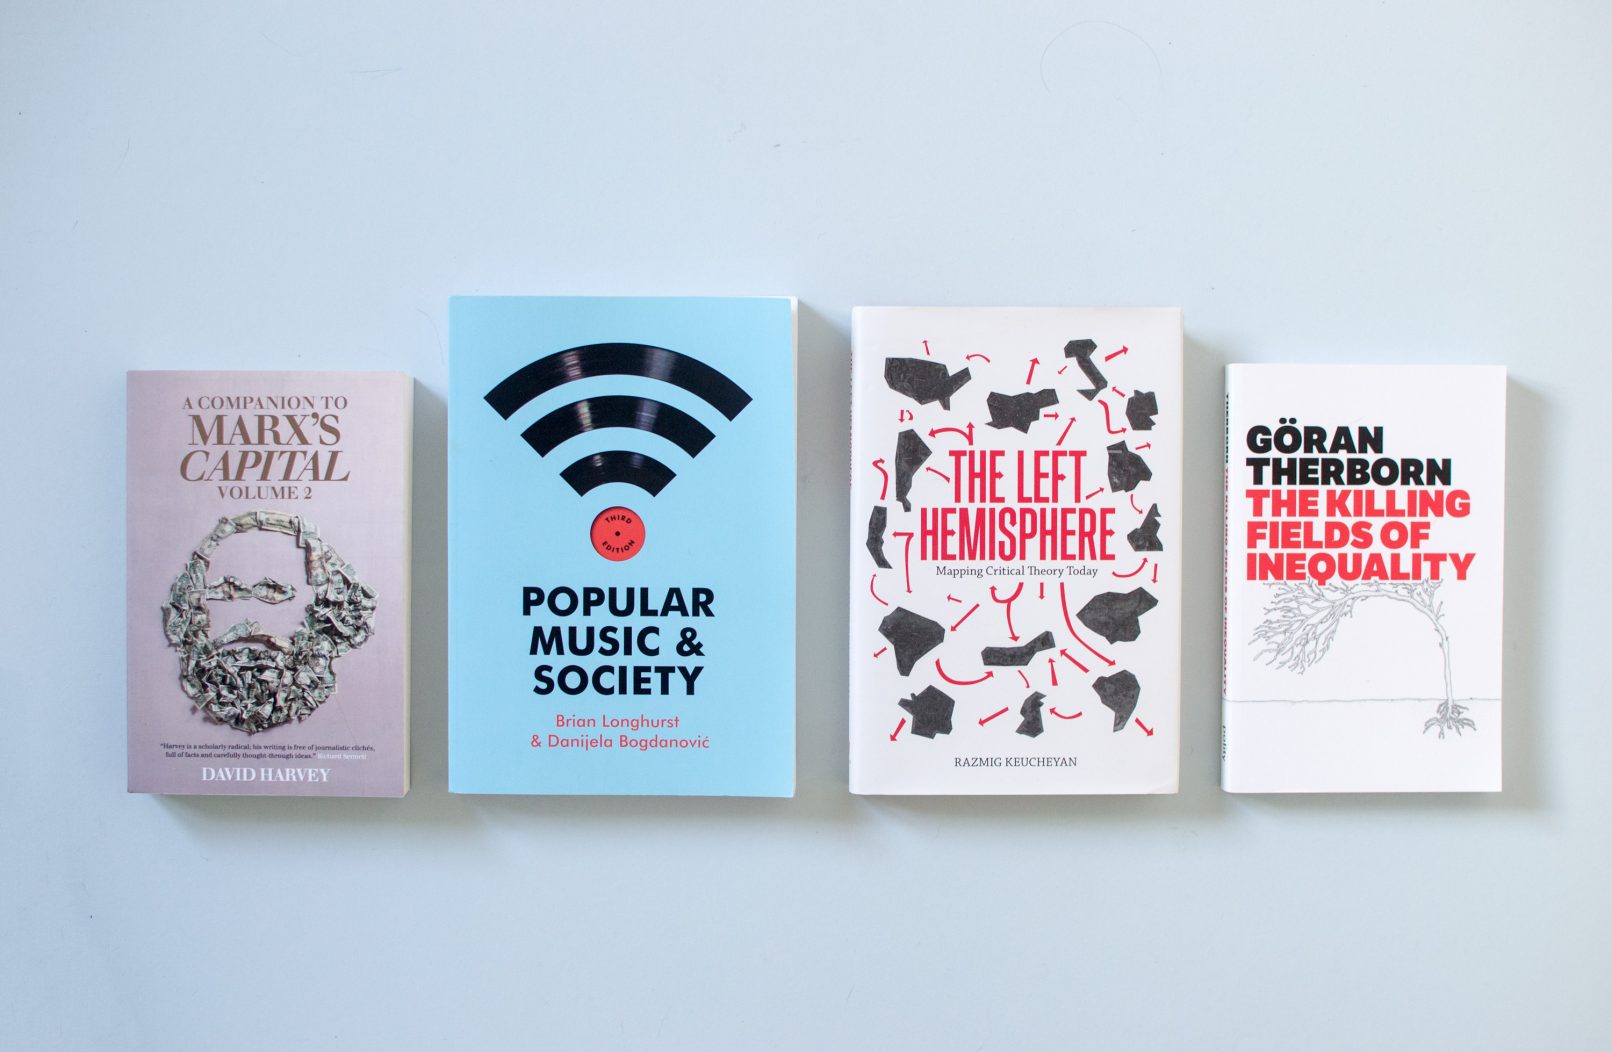 Feature image showing book cover designs for Polity and Verso Books